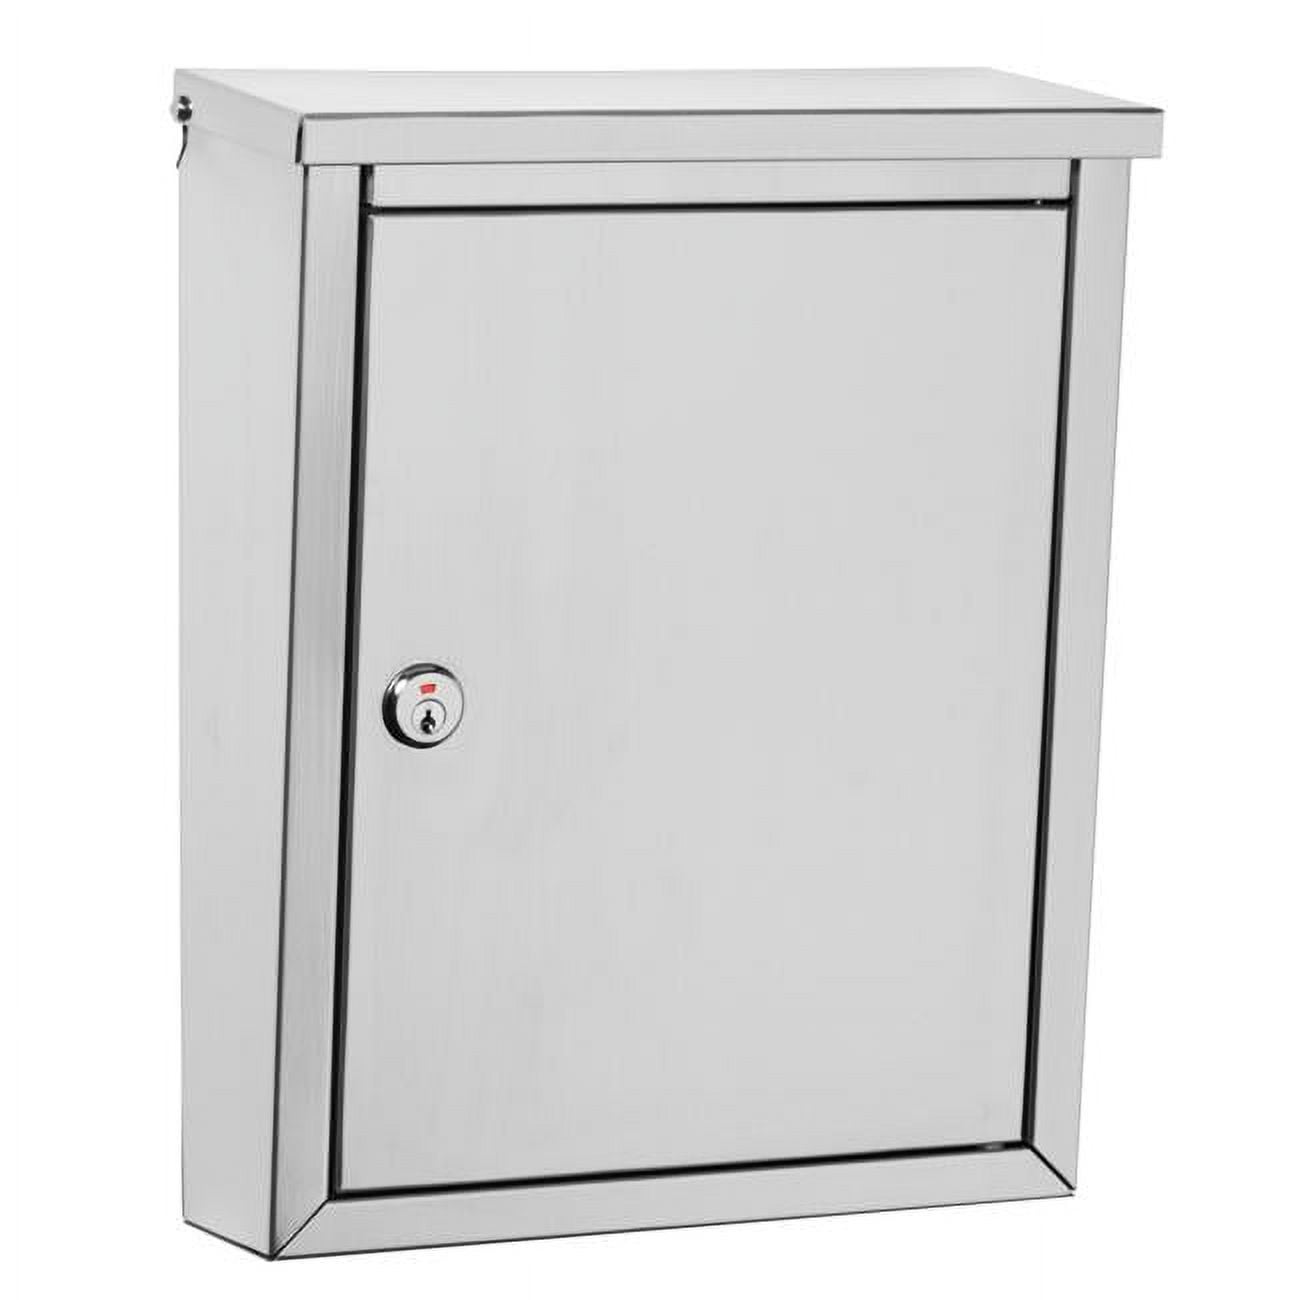 Picture of Architectural Mailboxes 2507PS-10 Regent Locking Wall Mount Medium Mailbox - Stainless Steel